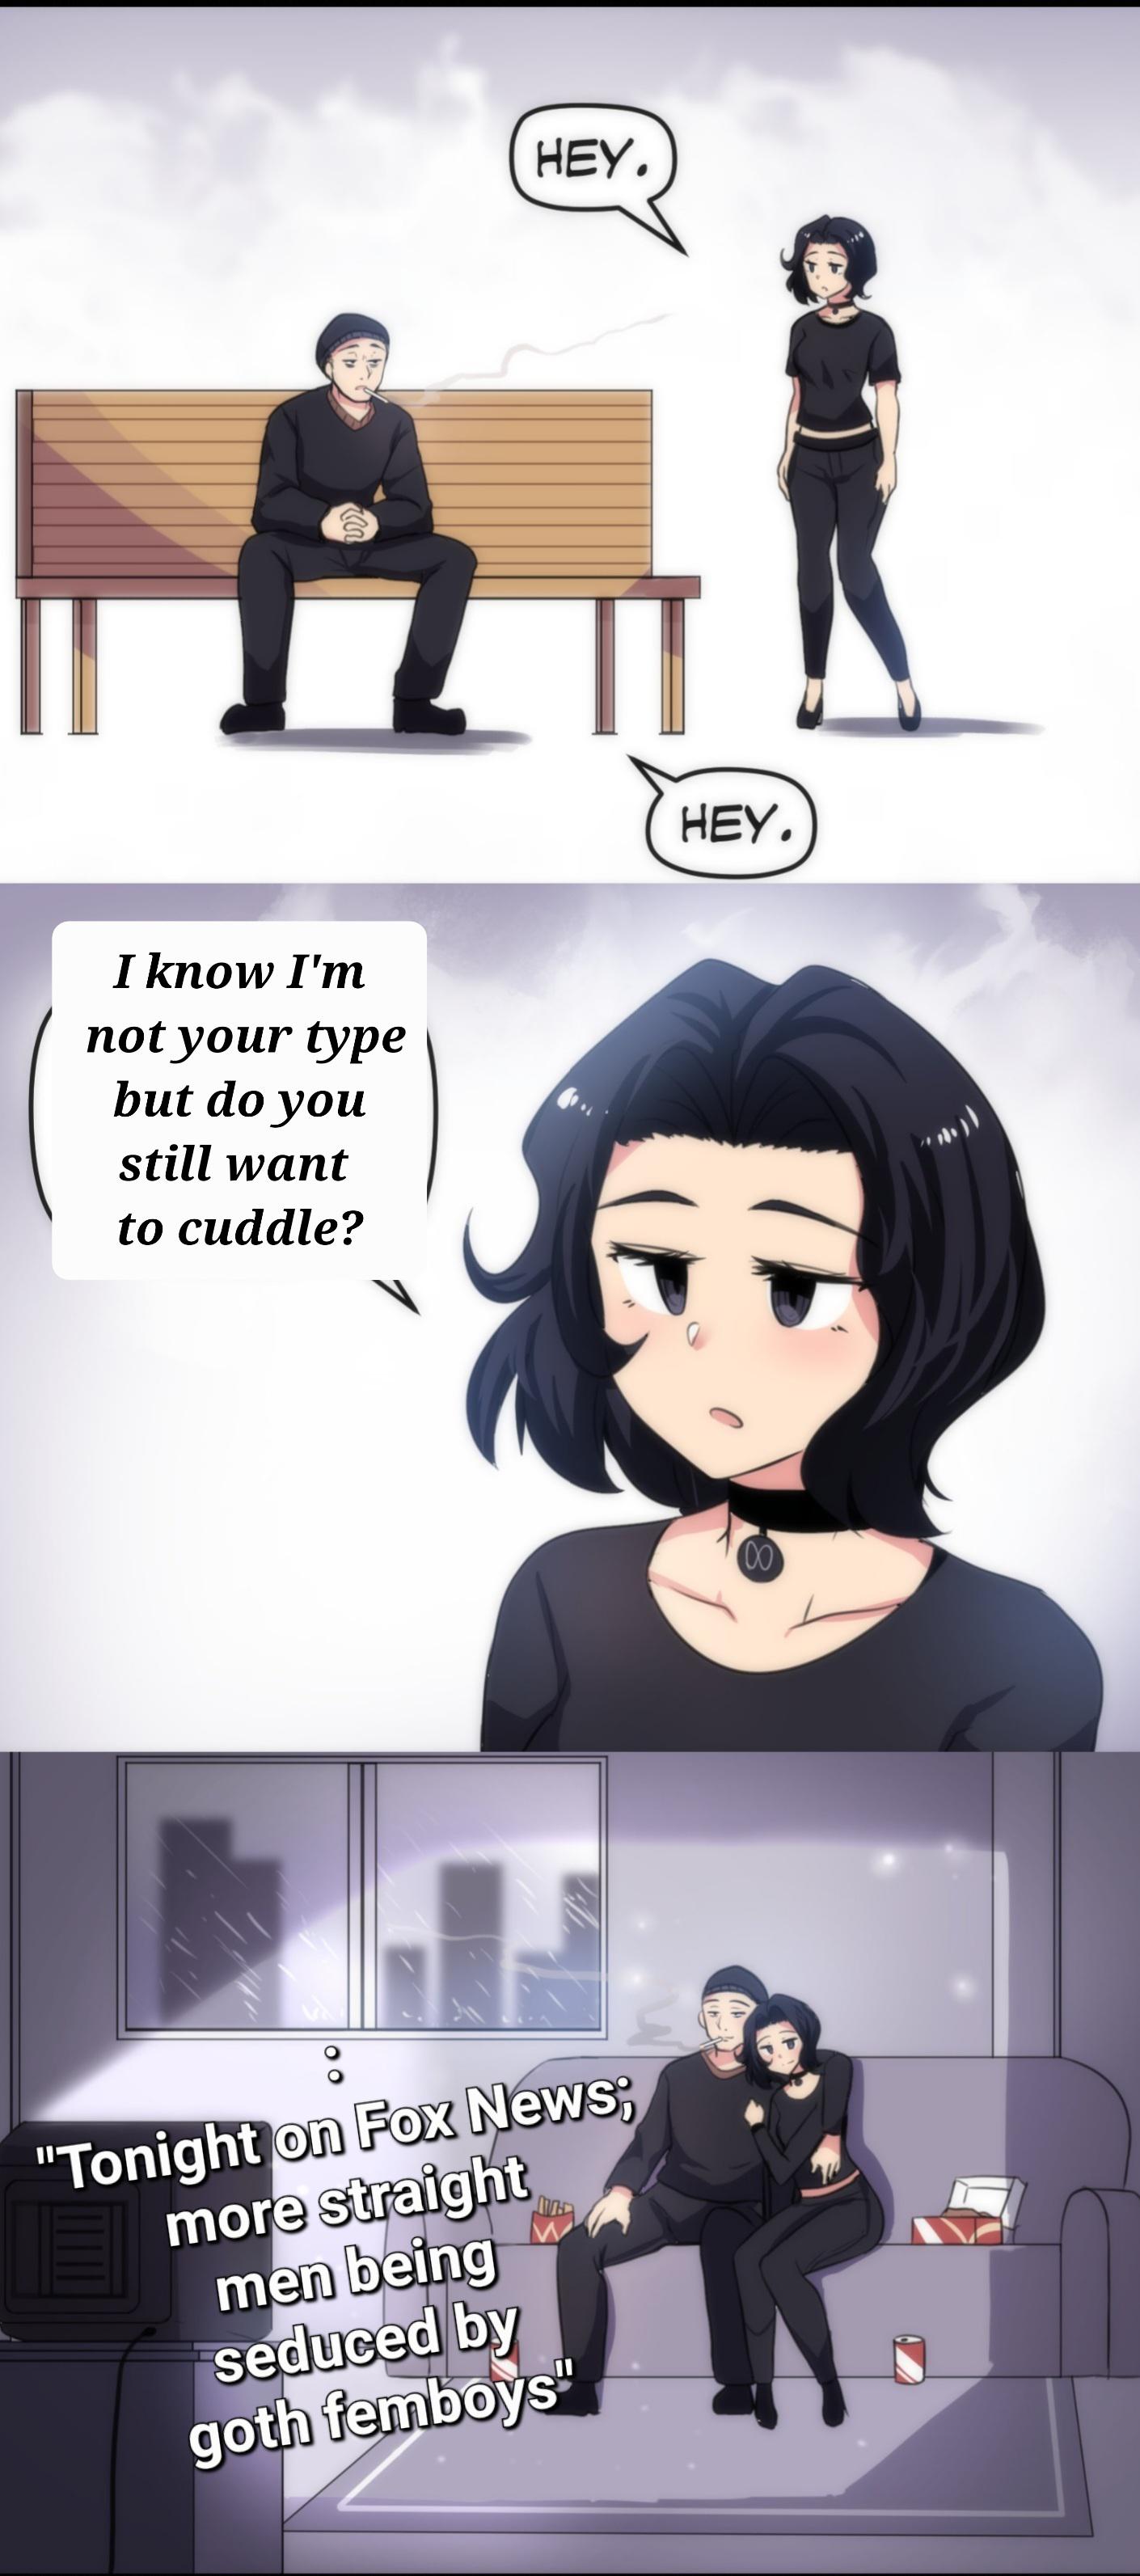 dank memes - funny memes - cartoon - un I know I'm not your type but do you still want to cuddle? Hey. "Tonight on Fox News; more straight men being seduced by goth femboys" Hey. 00